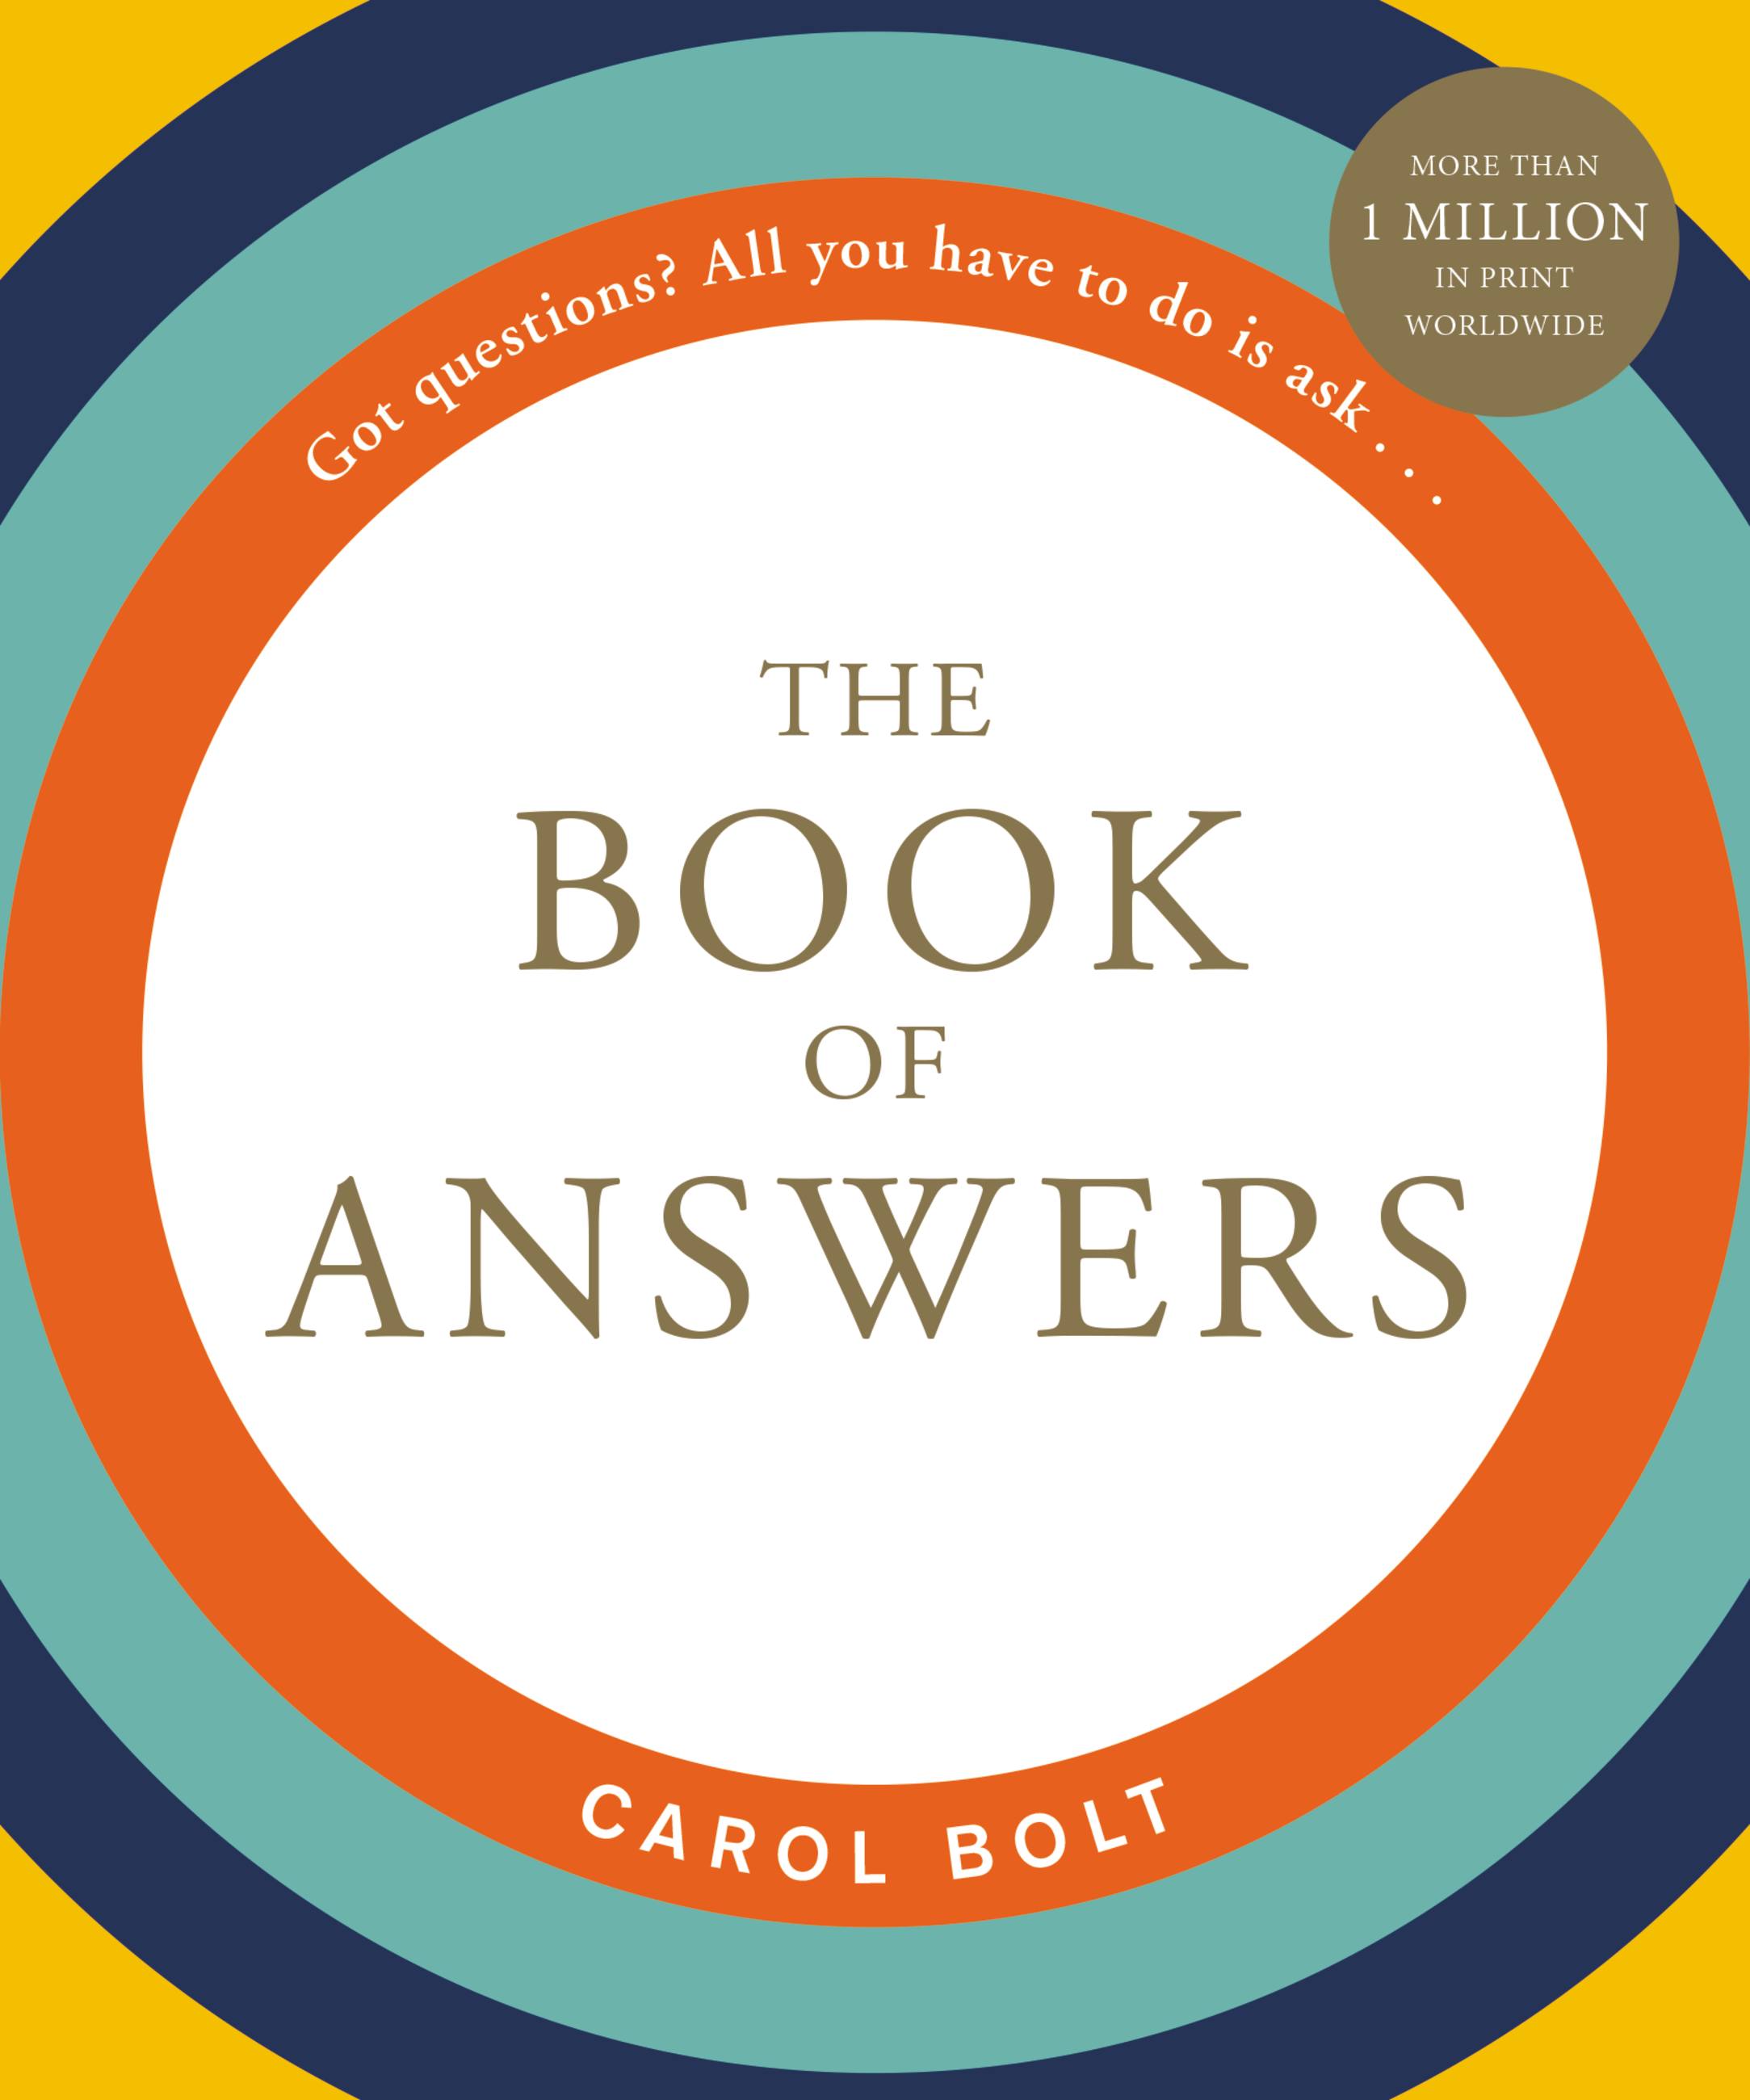 The Book of Answers by Carol Bolt | Hachette Book Group